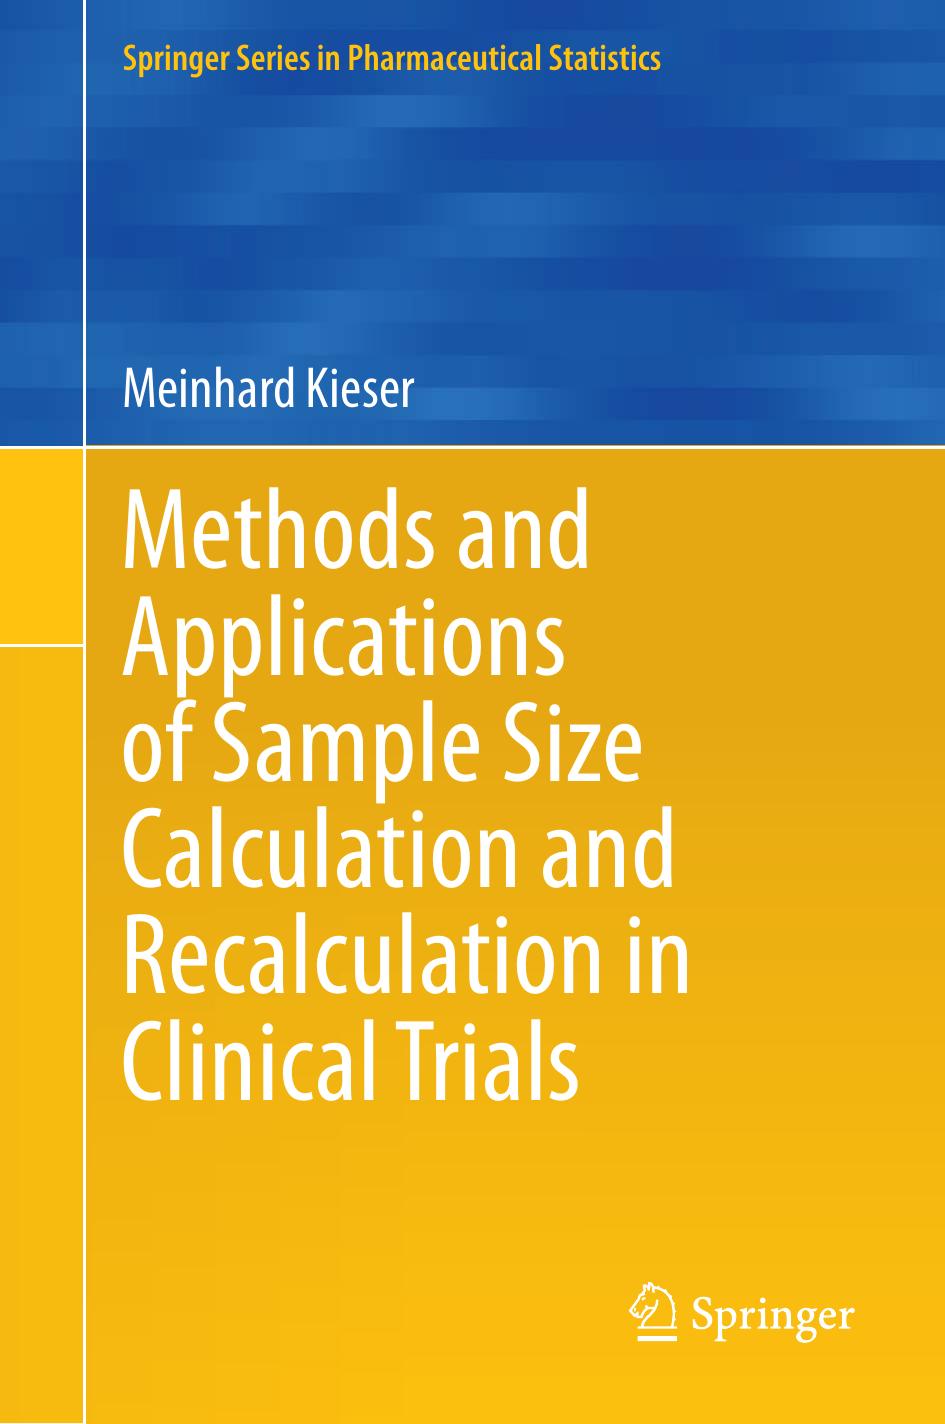 Methods and Applications of Sample Size Calculation and Recalculation in Clinical Trials by Meinhard Kieser